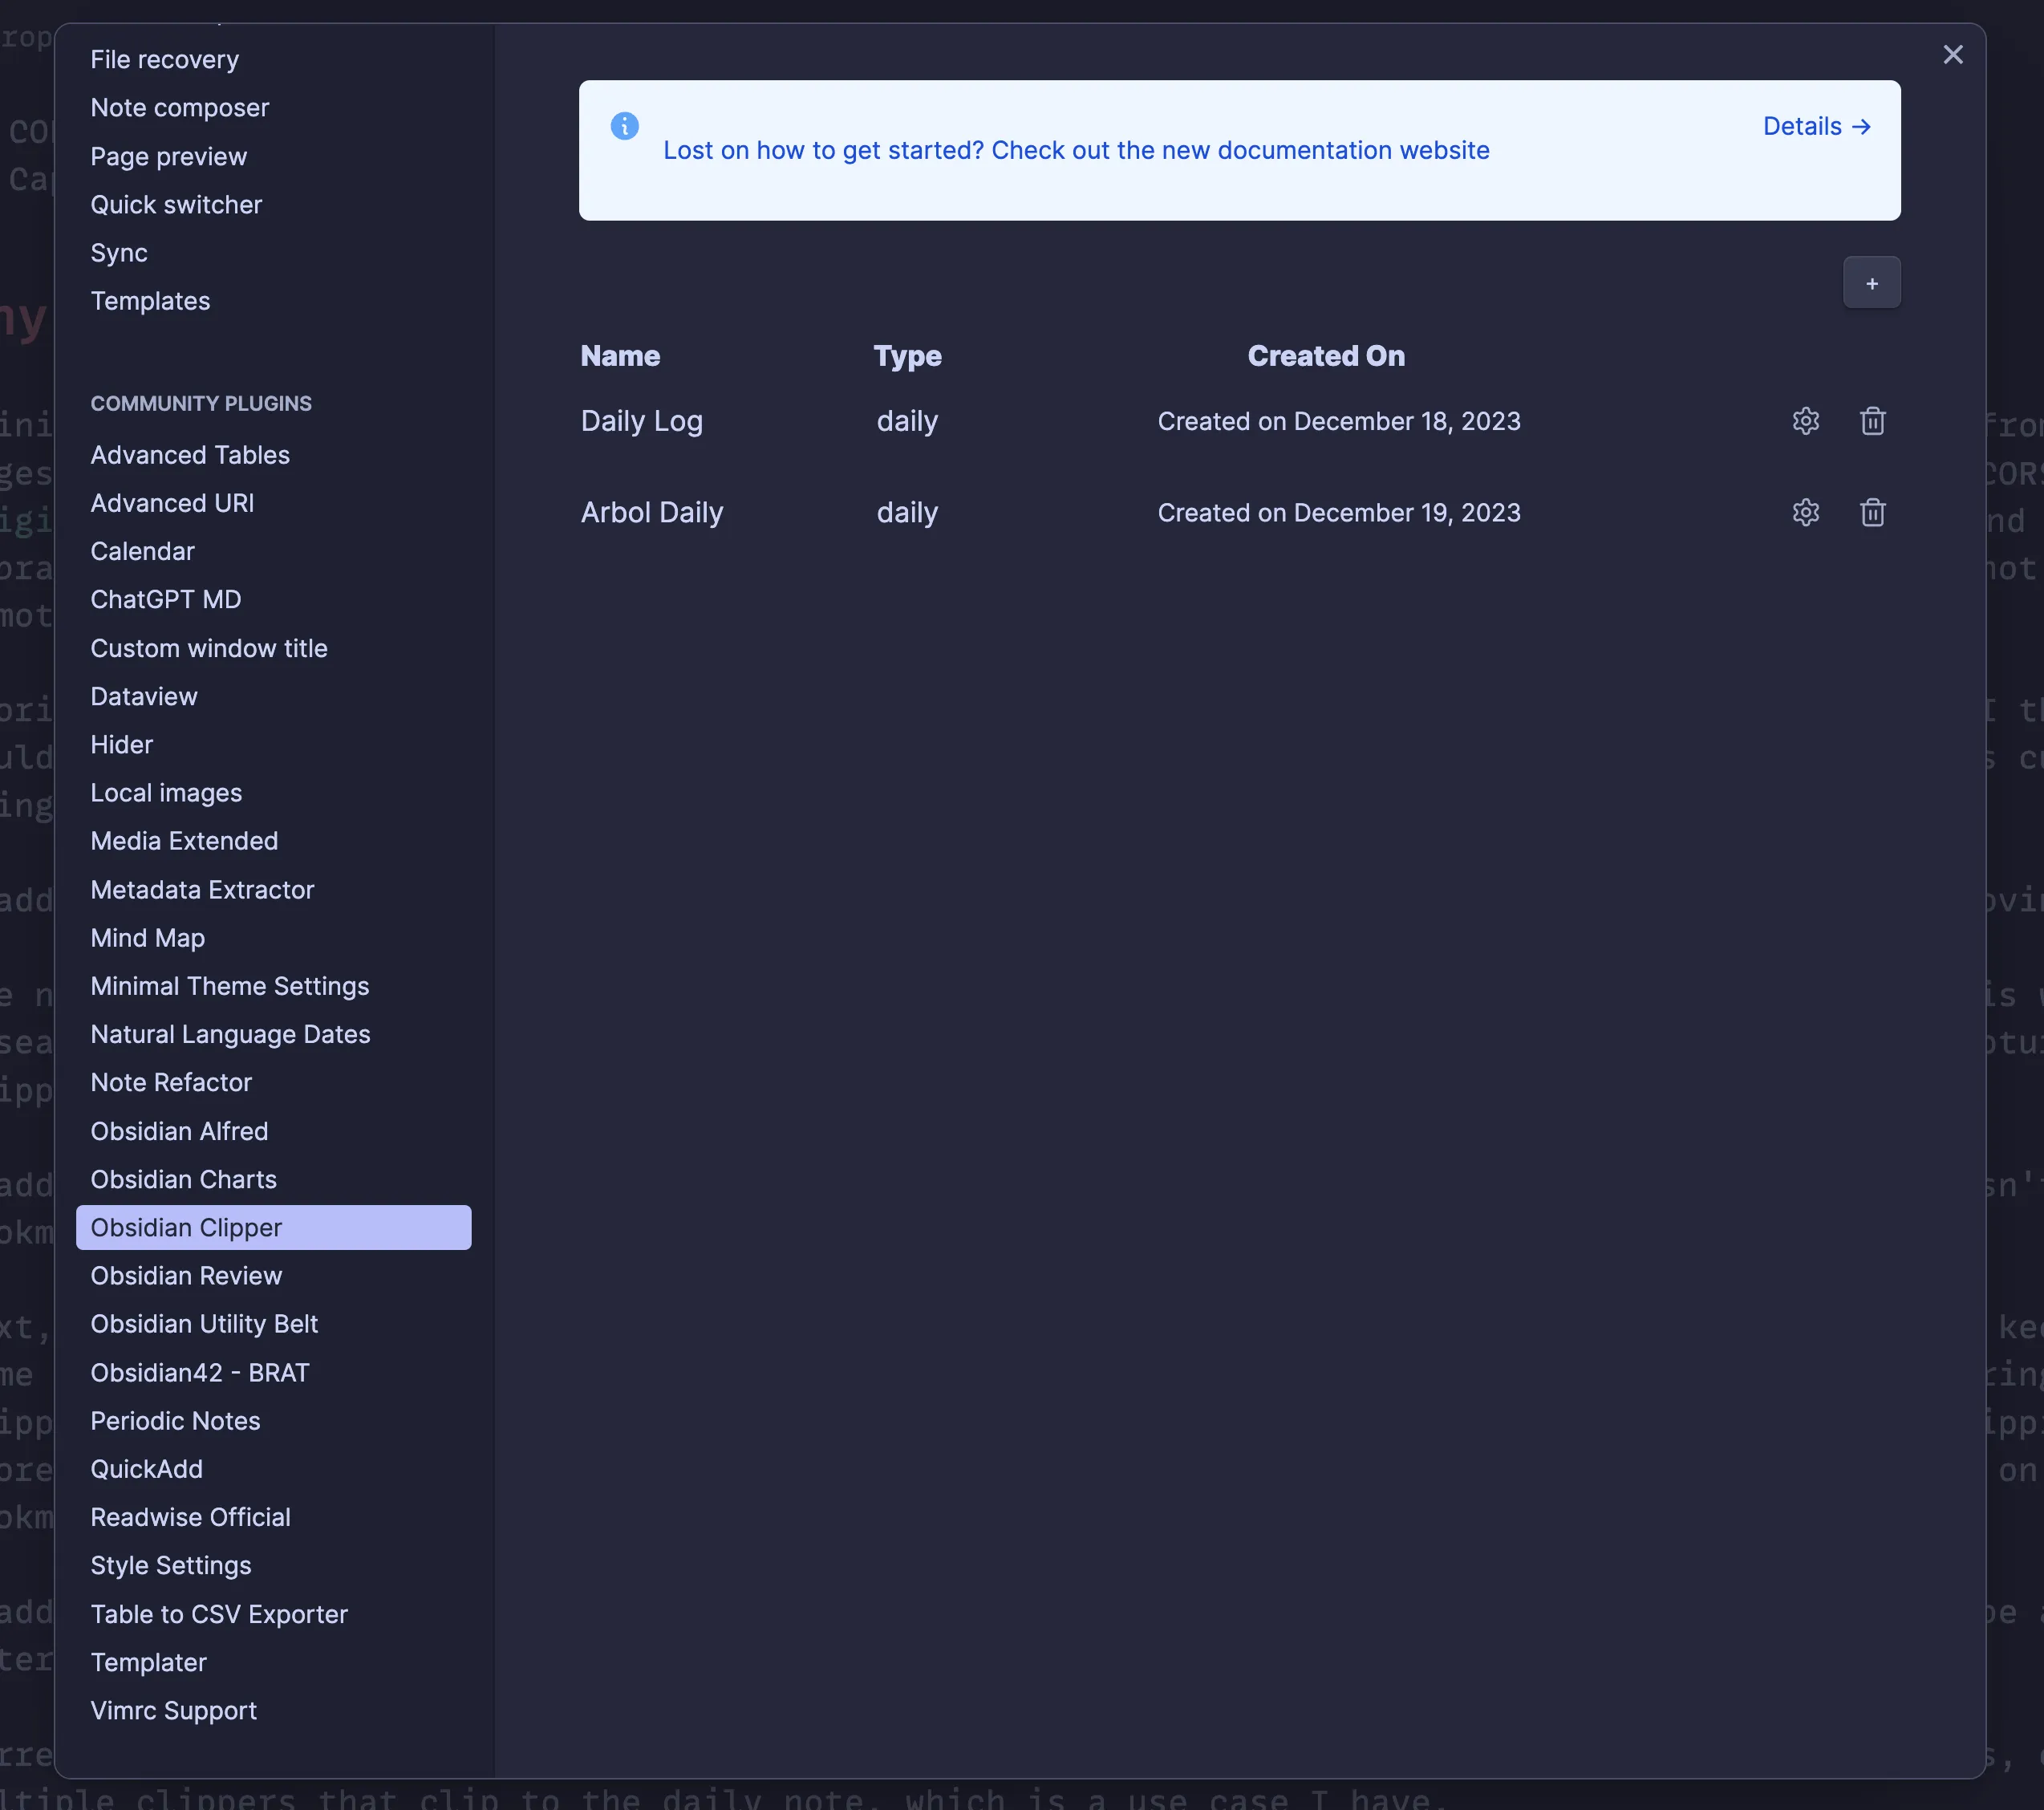 Screen shot of the new Obsidian Clipper settings